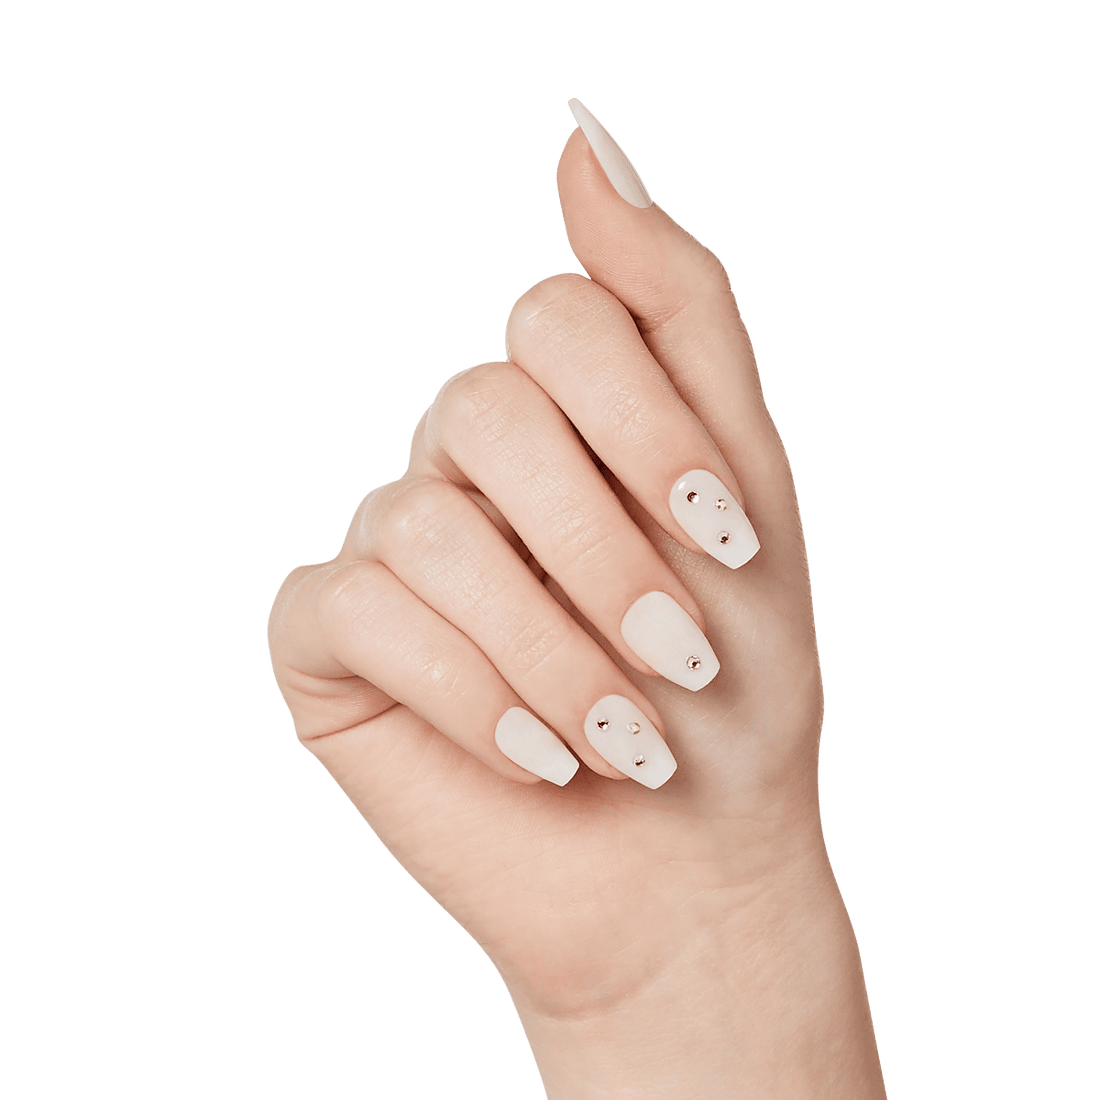 KISS Bare But Better, Press-On Nails, Syrup, White, Short Coffin, 28ct